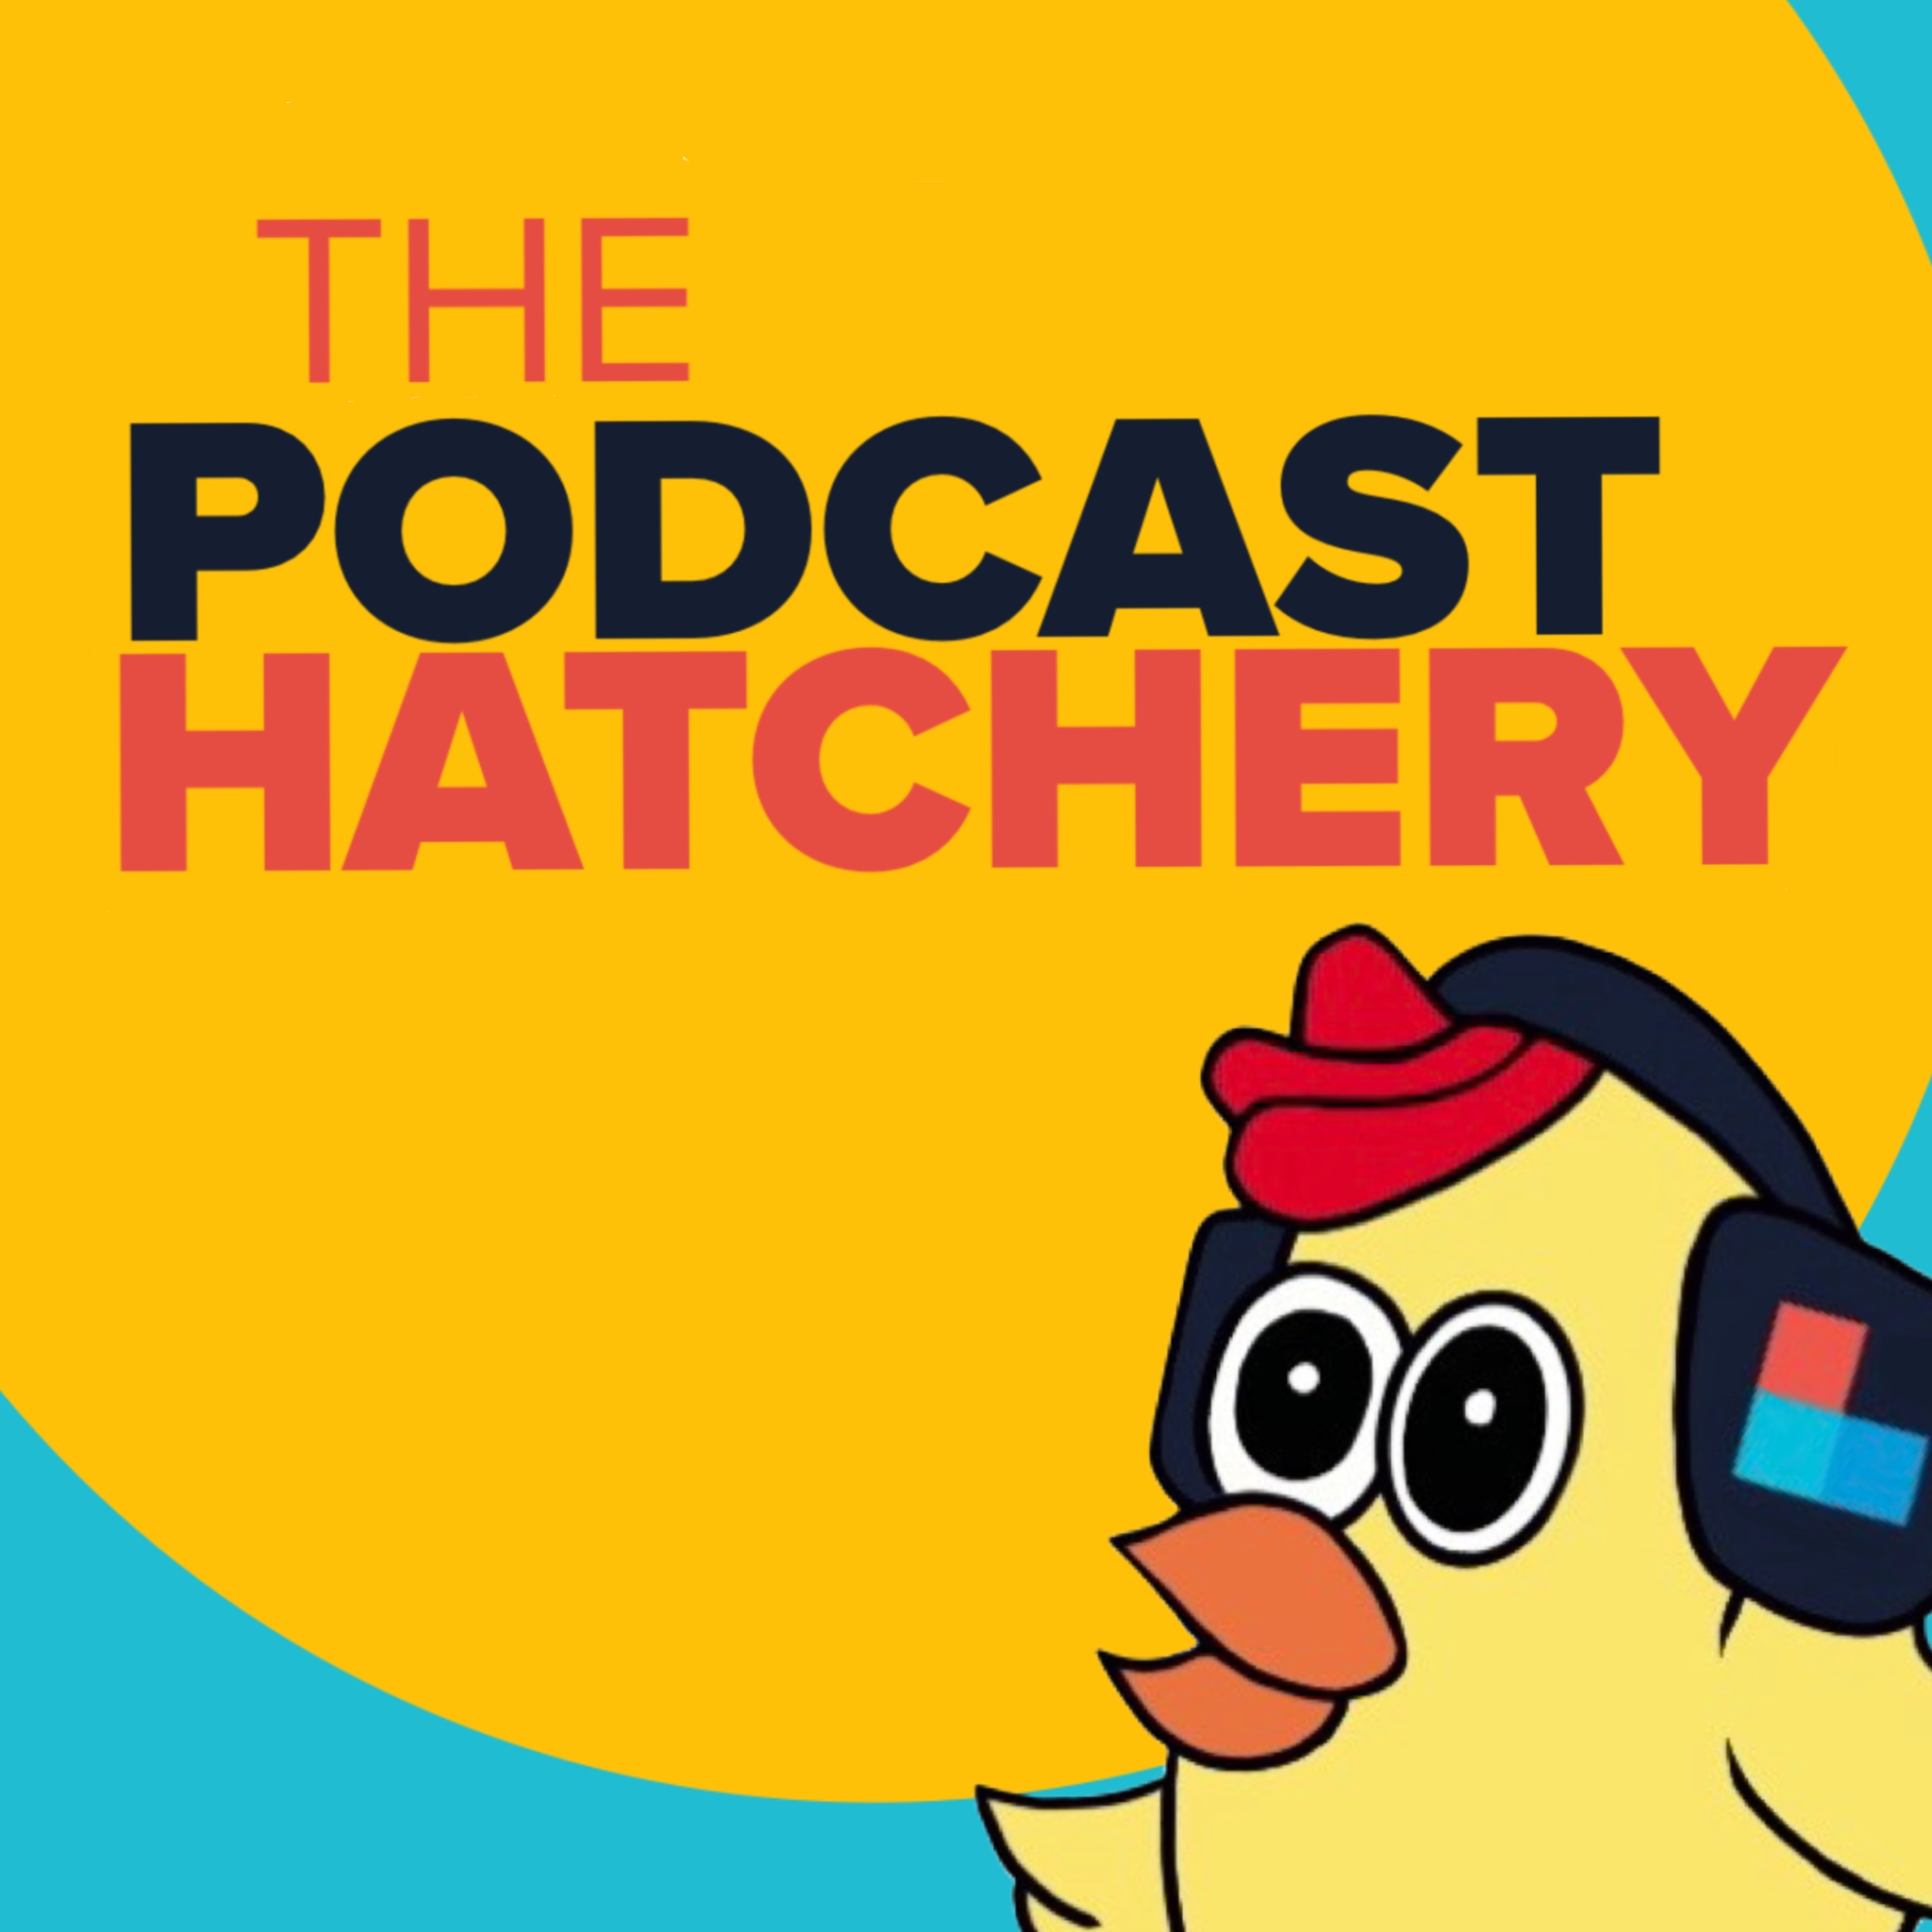 The Podcast Hatchery from Laura Ellis